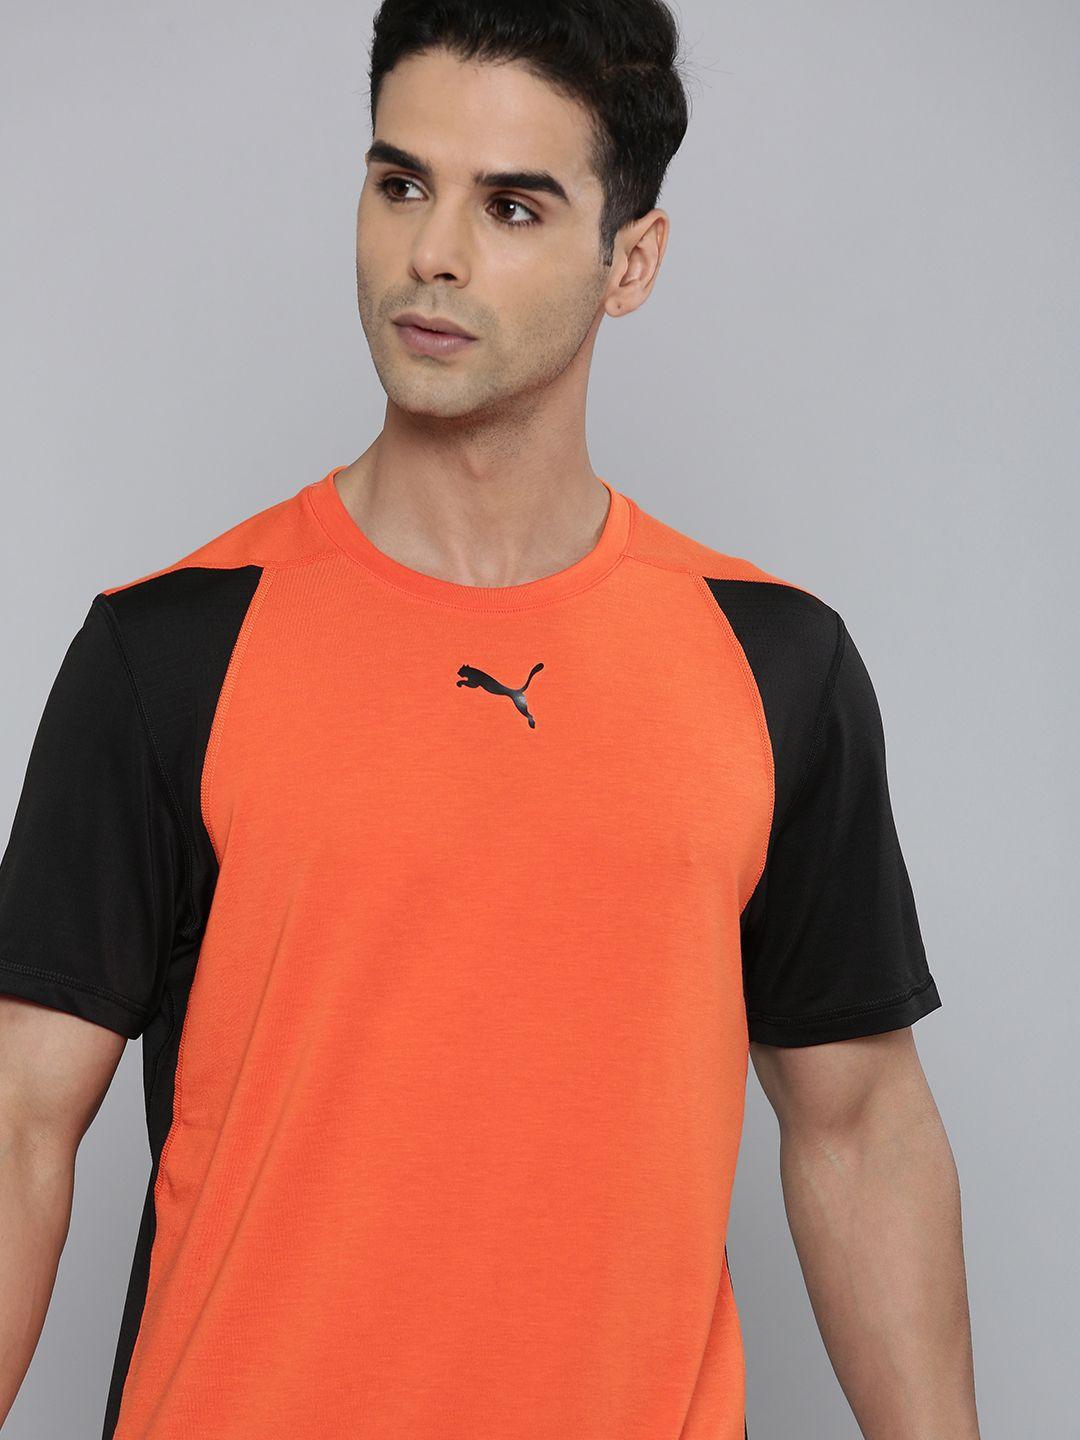 puma colourblocked knitted engineered for strength training or gym t-shirt